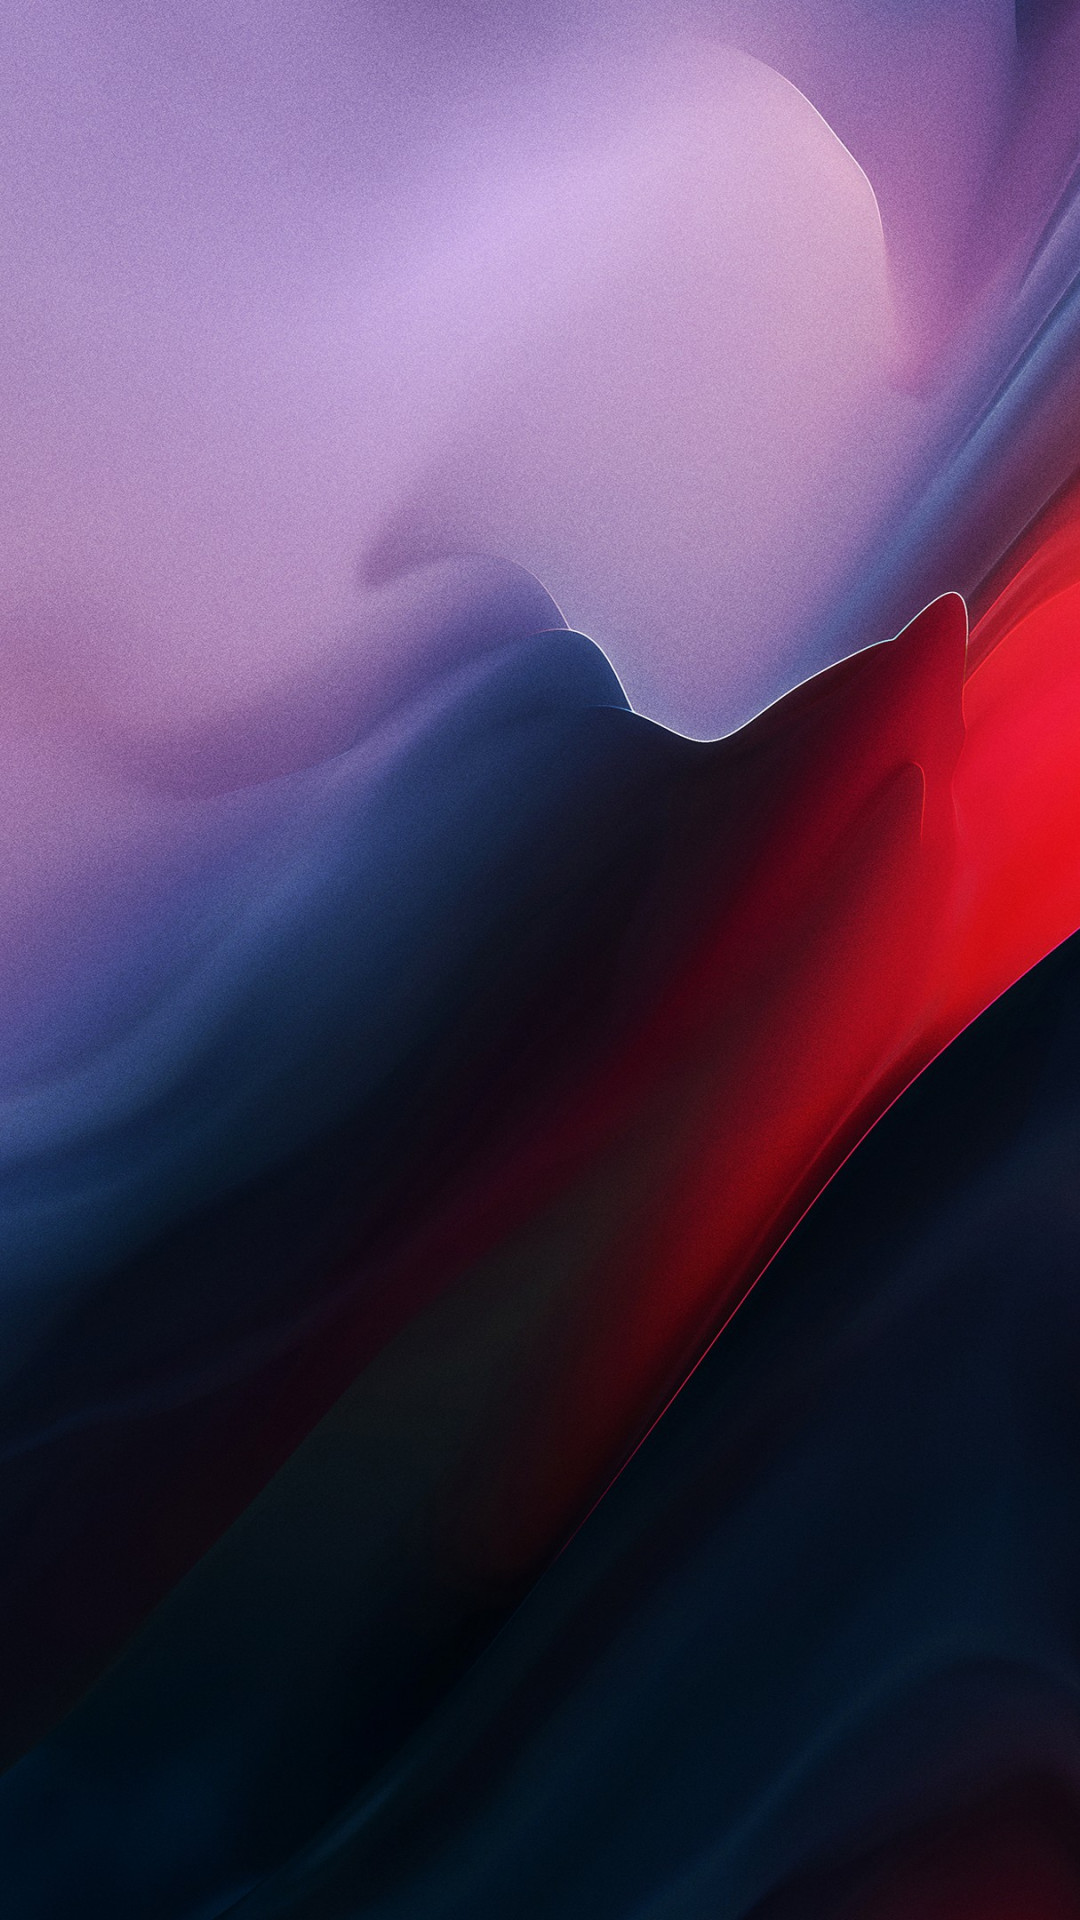 The Abstract from OnePlus 6T wallpaper 1080x1920